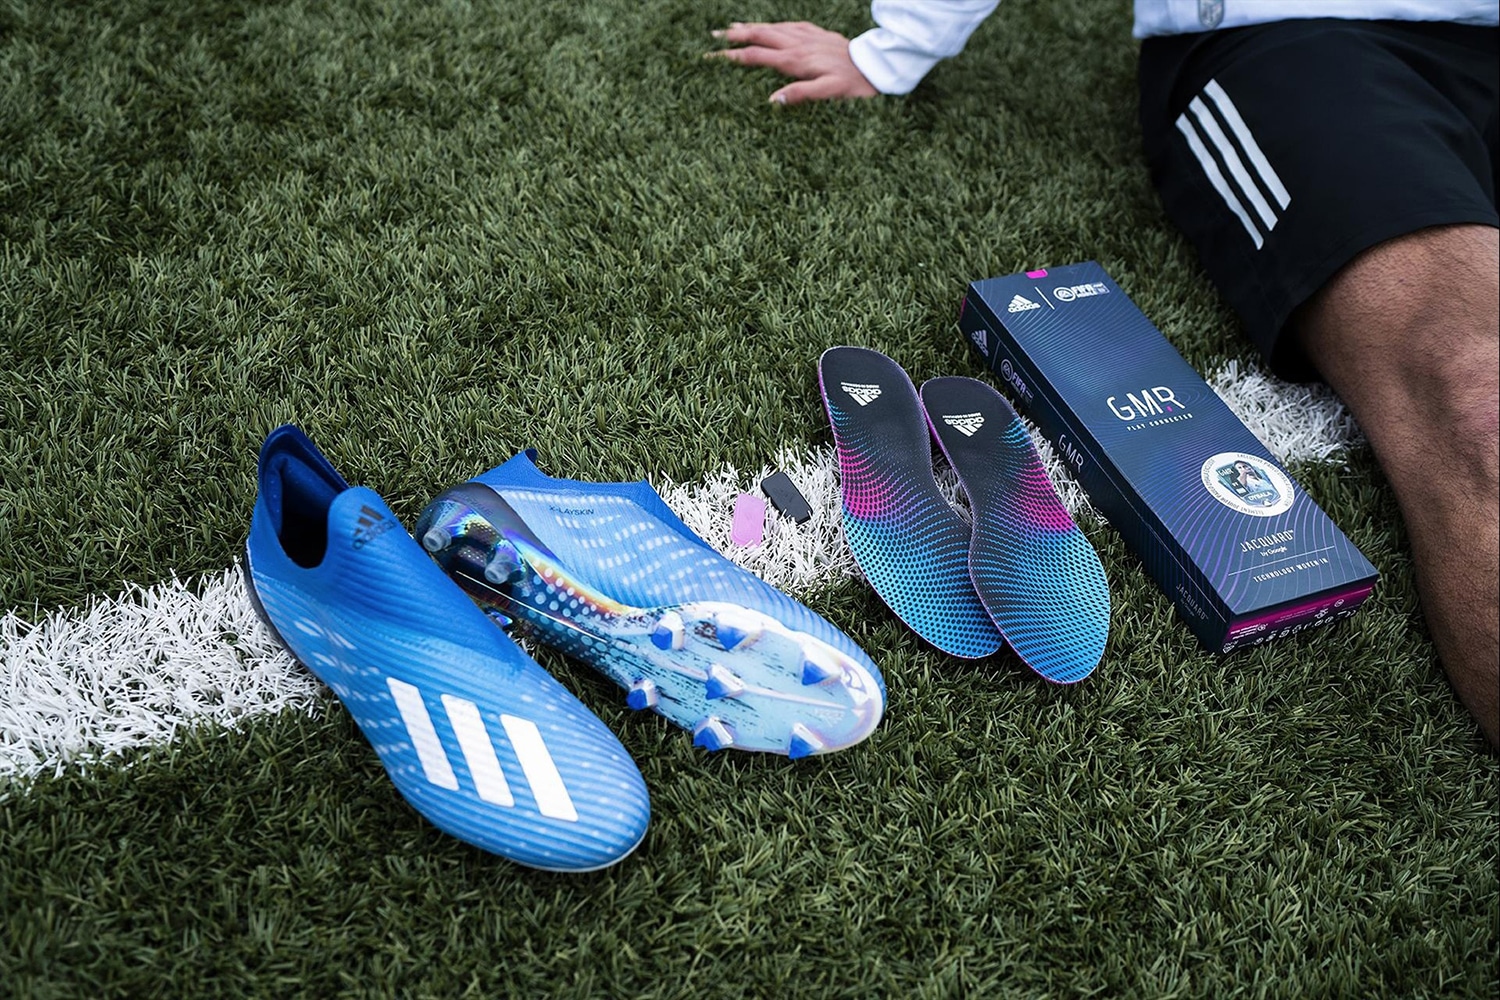 Adidas GMR, the smart insole to unlock the prizes in FIFA Mobile.